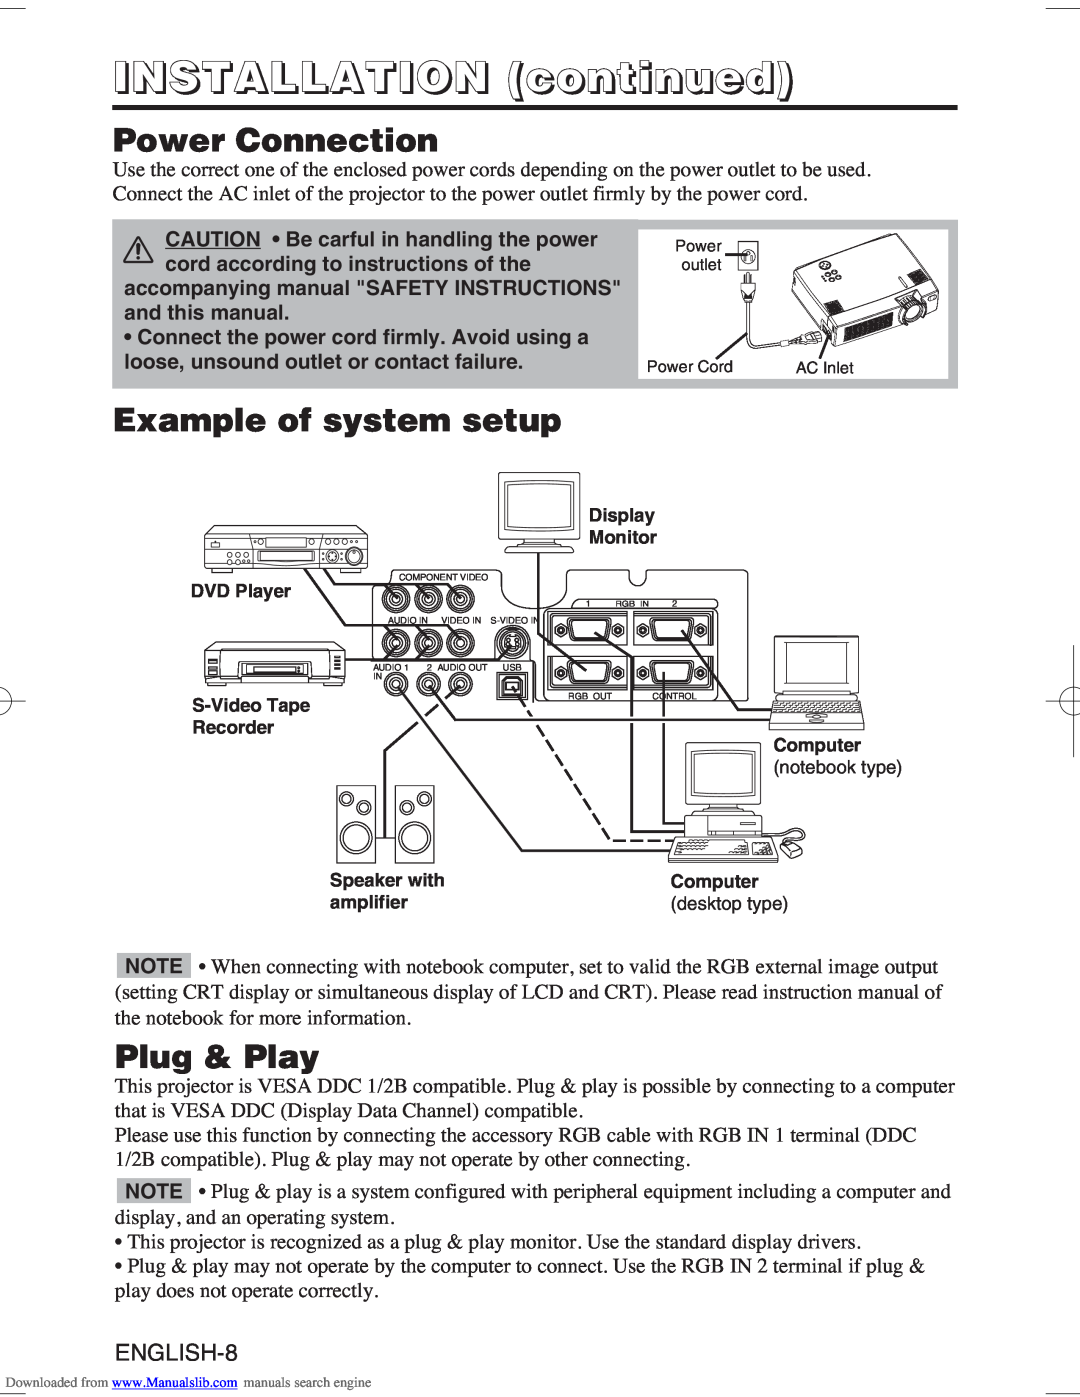 Hitachi CP-S370W user manual Power Connection, Example of system setup, Plug & Play, INSTALLATION continued 